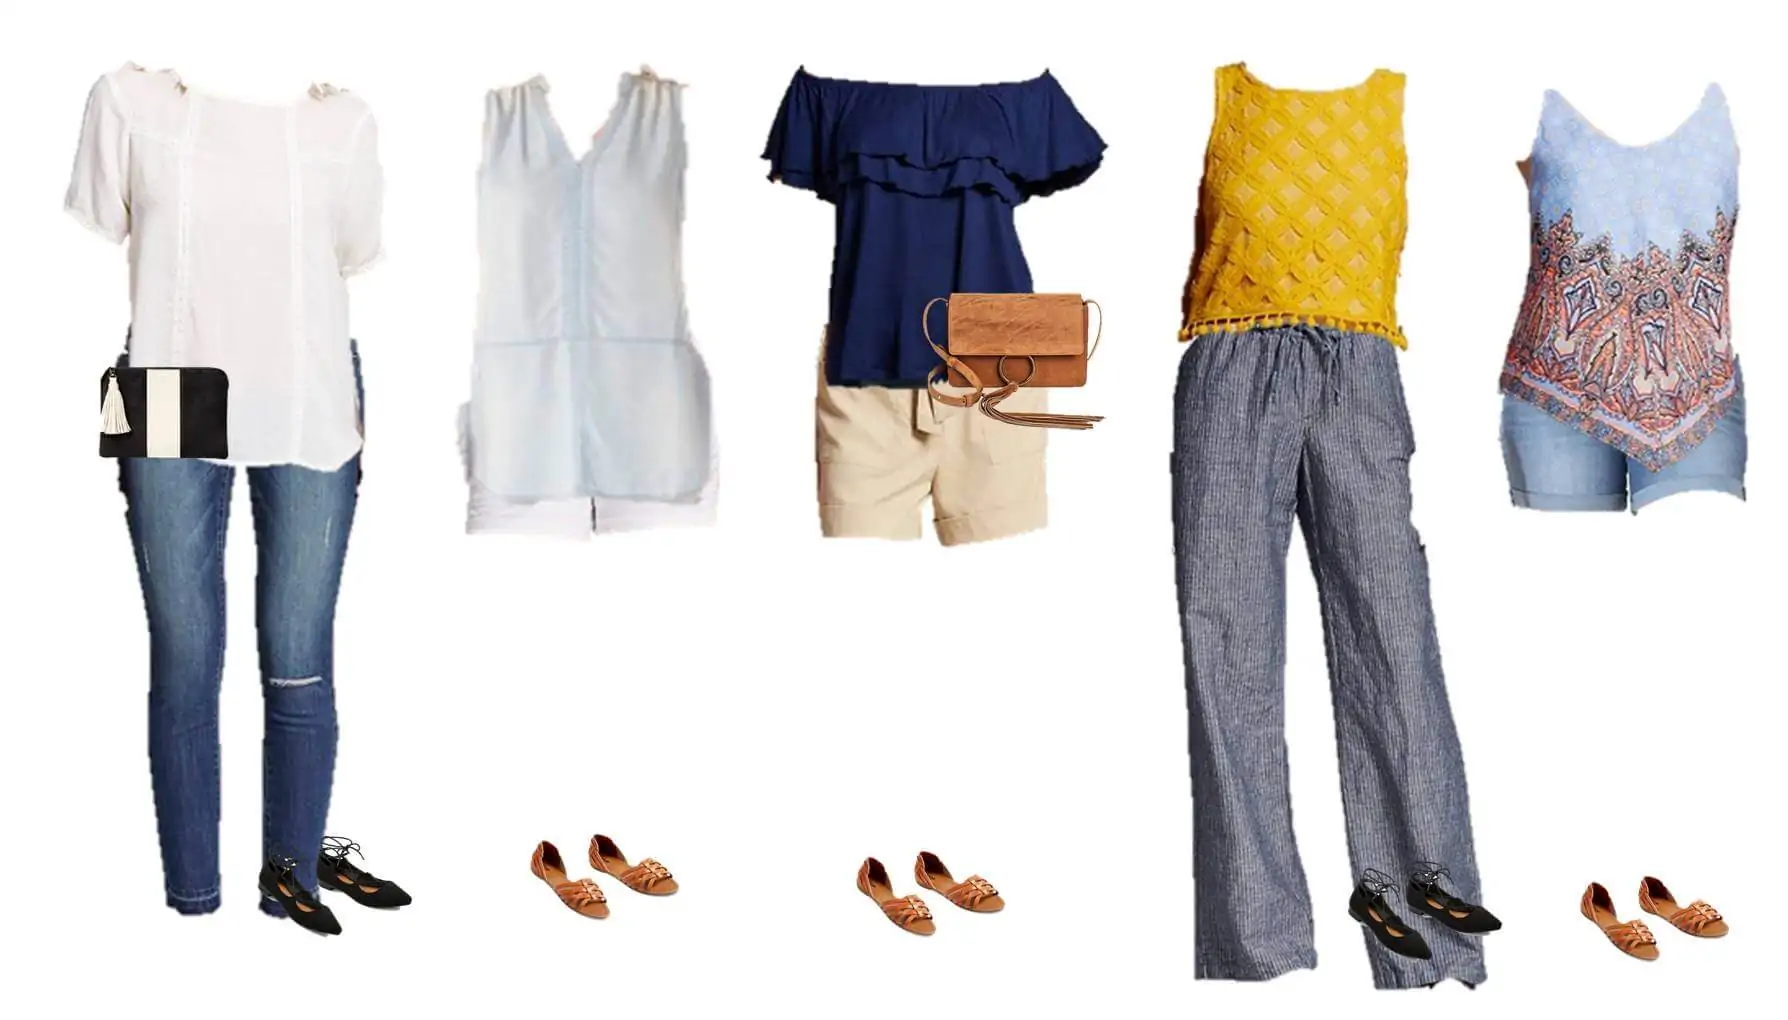 5.10 Mix and Match Fashion - Target Summer Styles 11-15